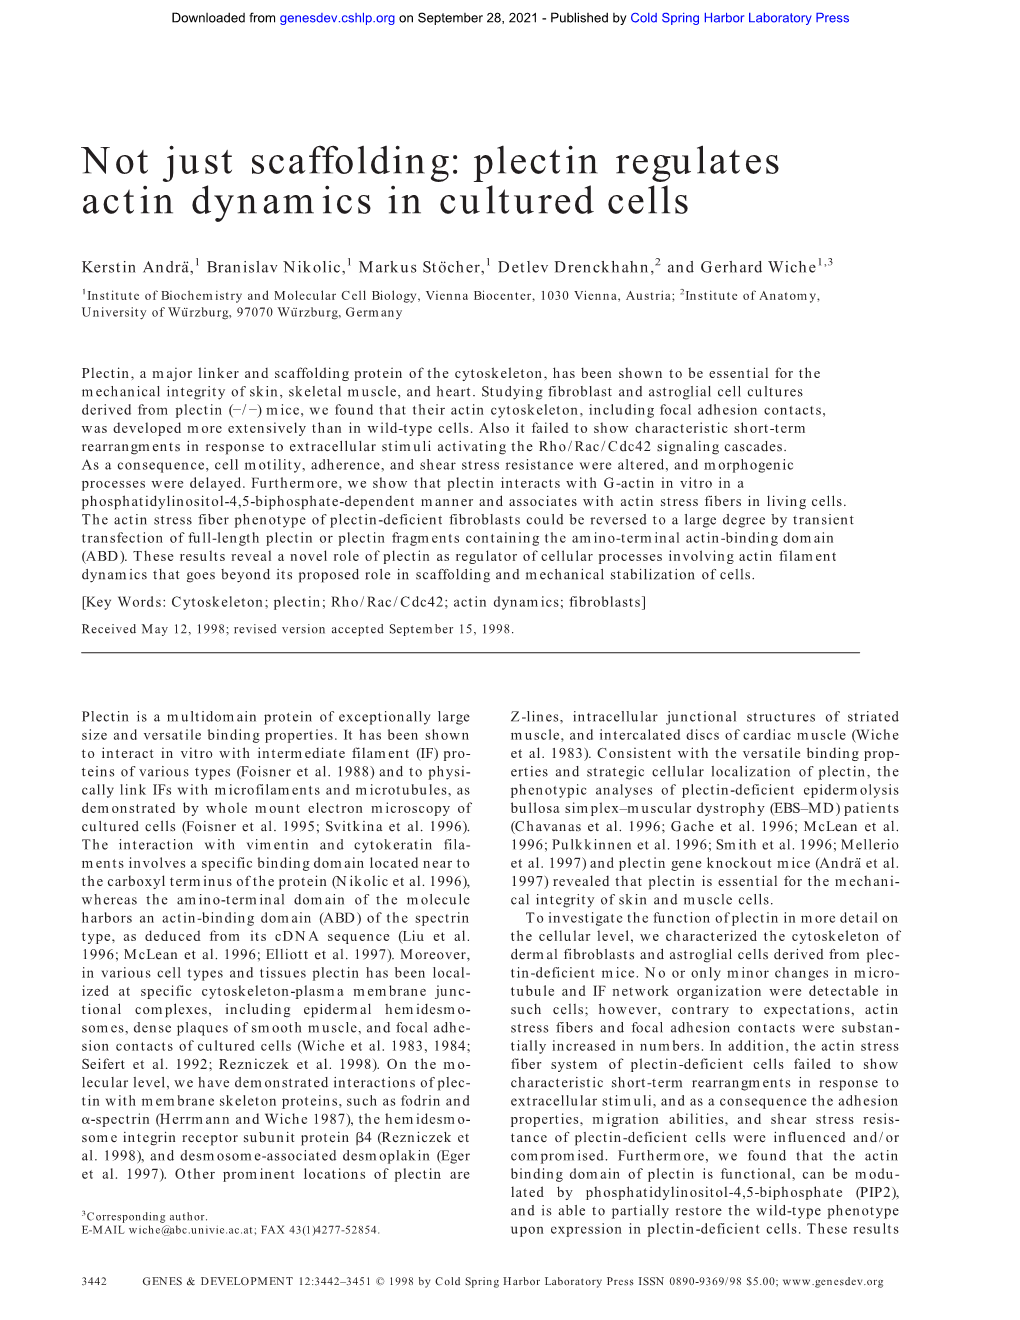 Not Just Scaffolding: Plectin Regulates Actin Dynamics in Cultured Cells